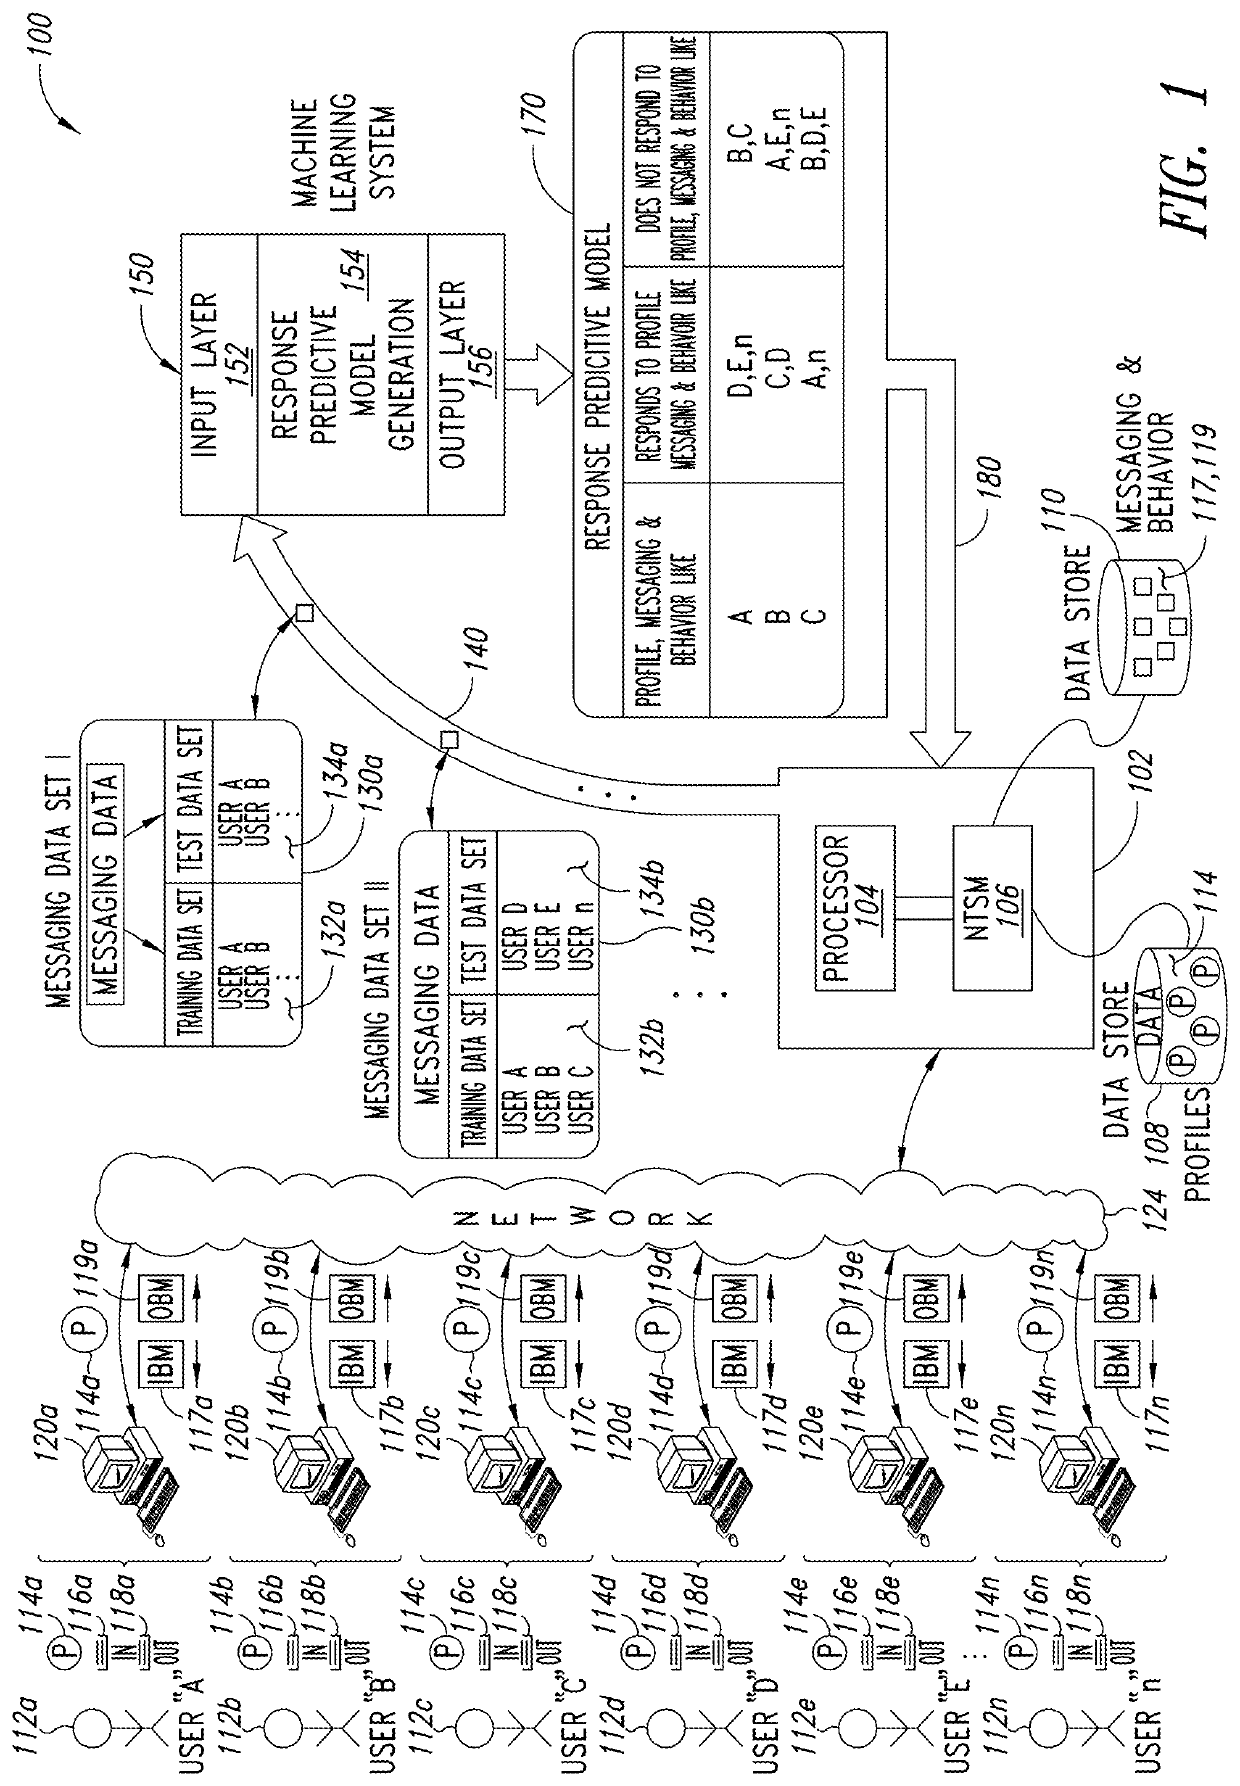 Apparatus, method and article to effect electronic message reply rate matching in a network environment